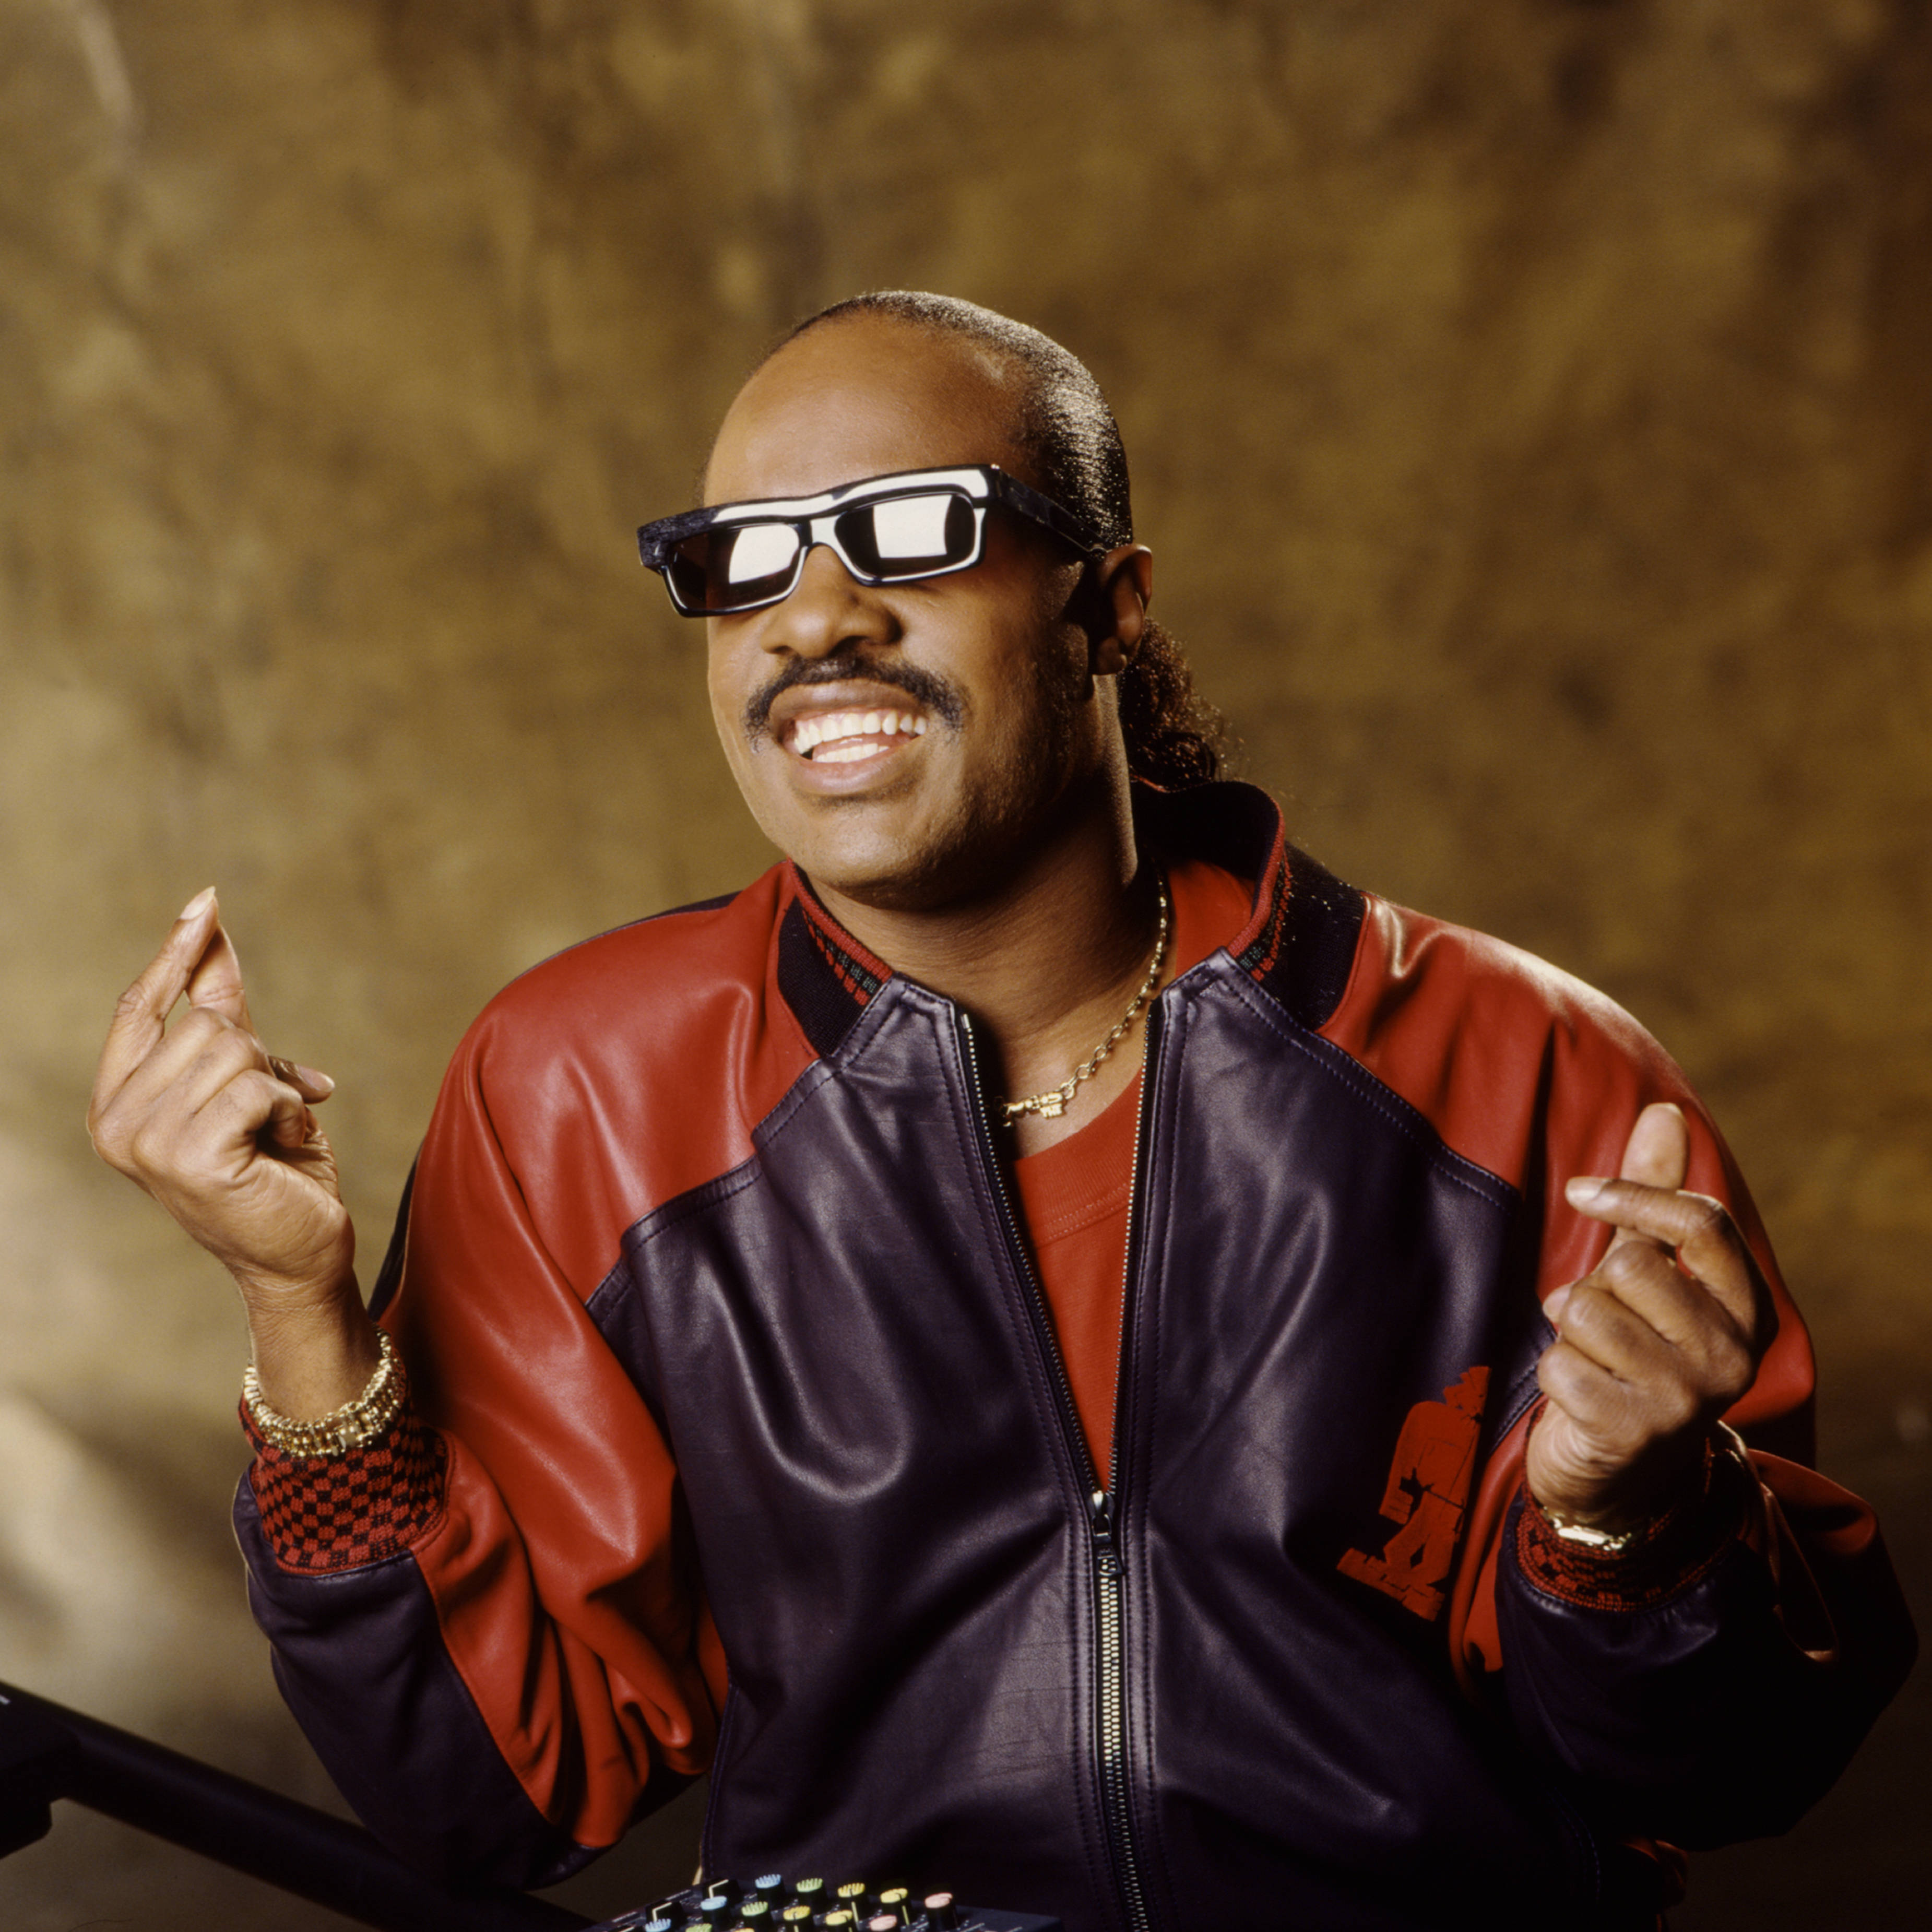 II. Early life and musical influences of Stevie Wonder